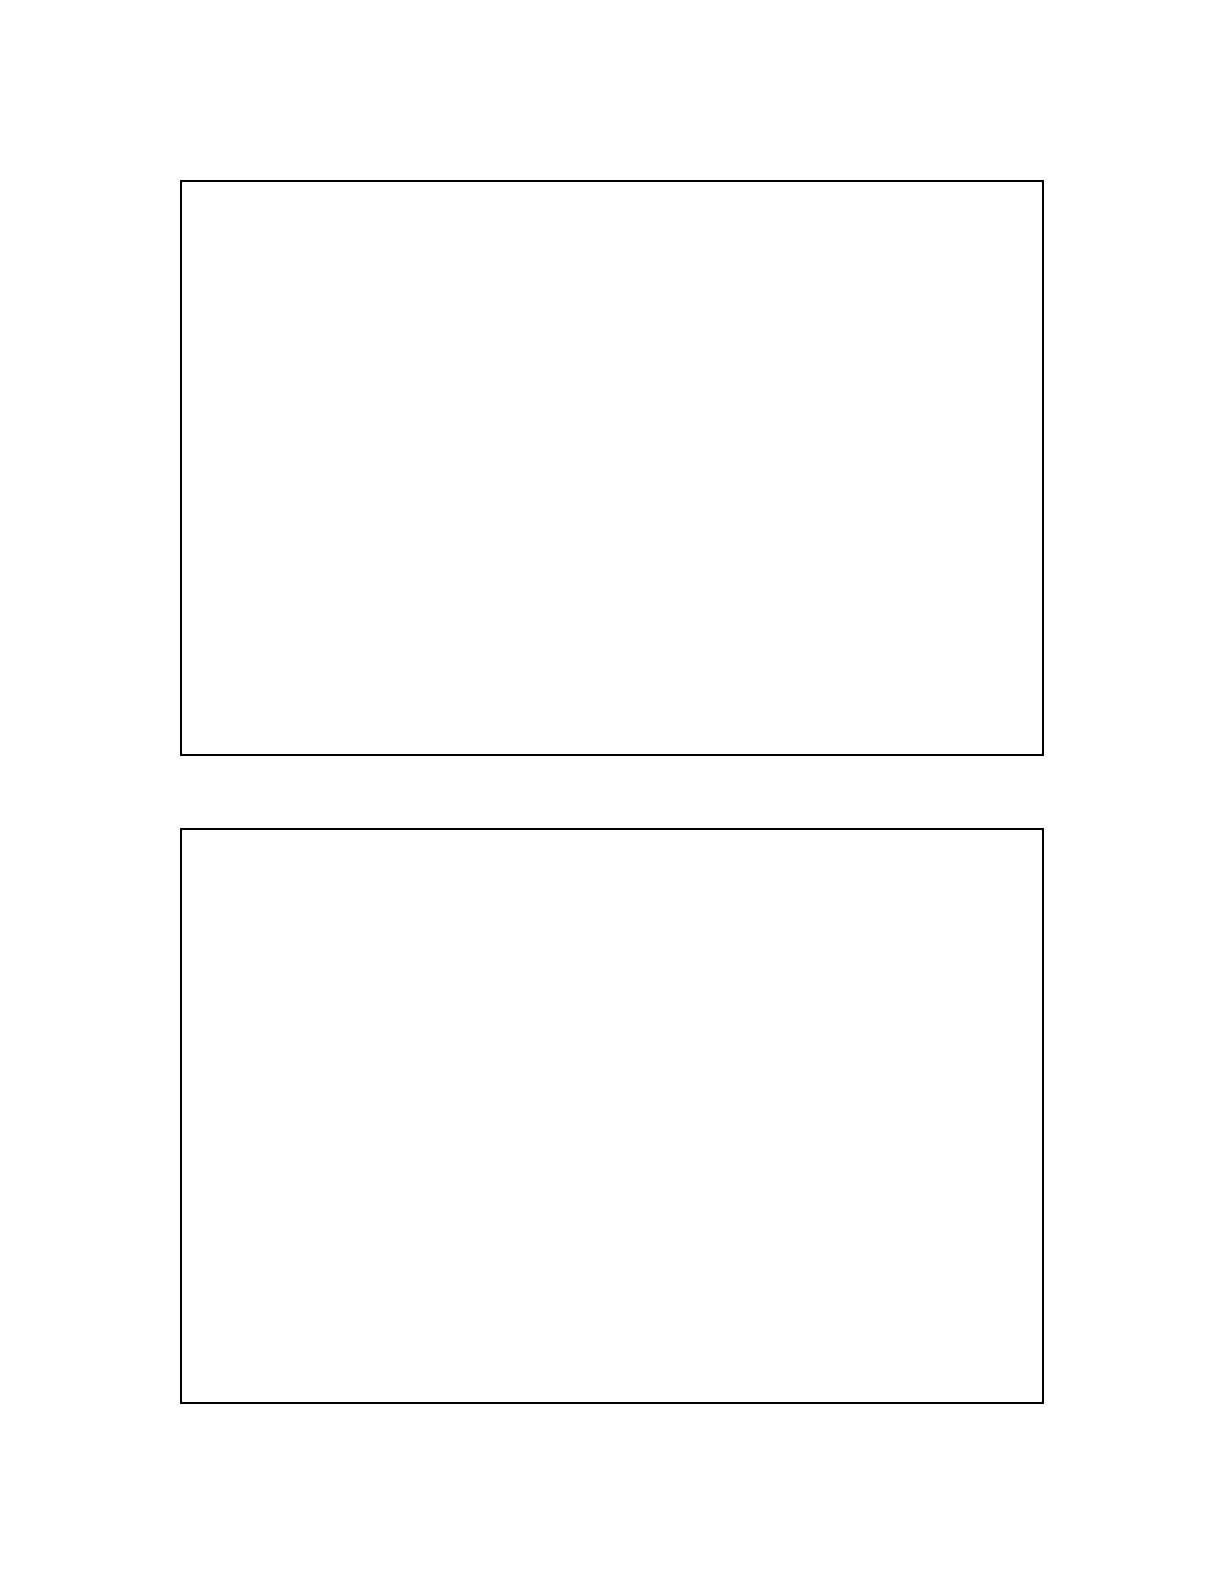 Free Printable 4x6 Index Card Template